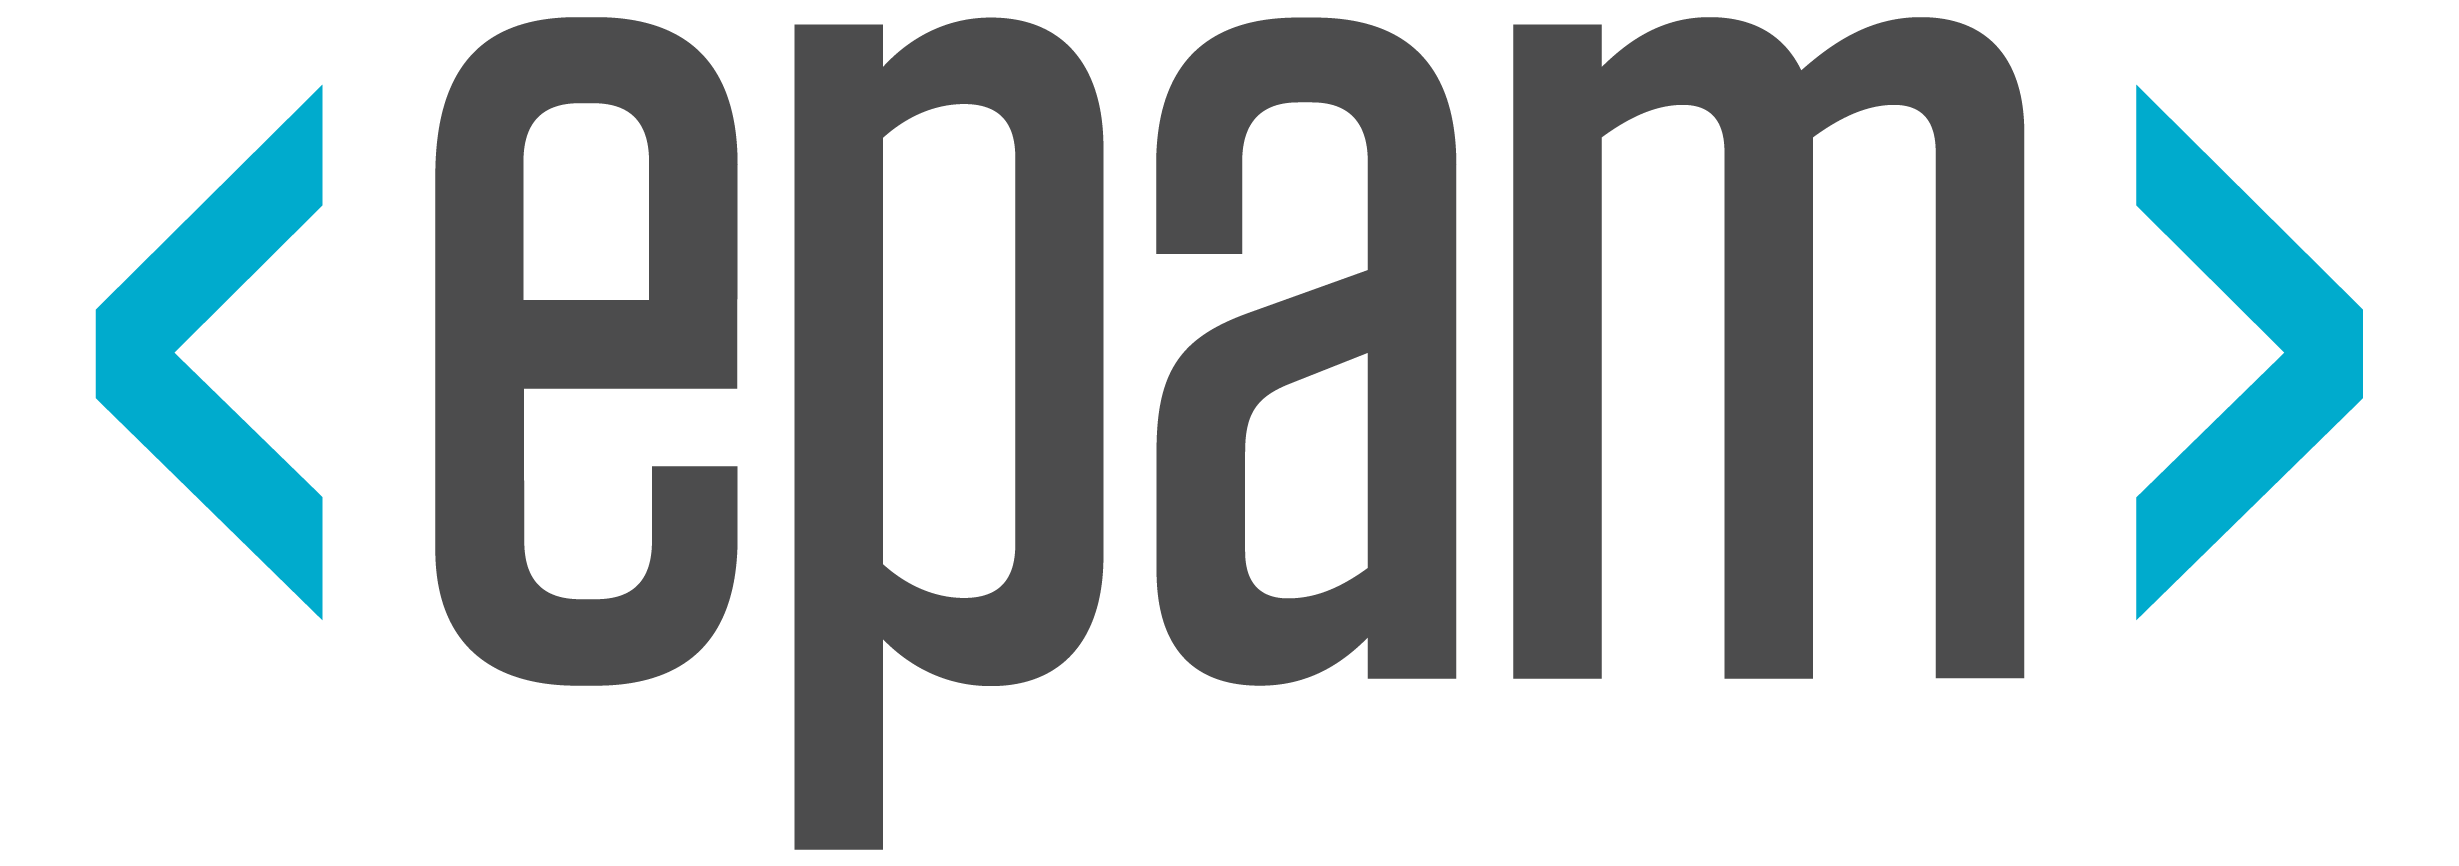 EPAM_LOGO_Primary.png